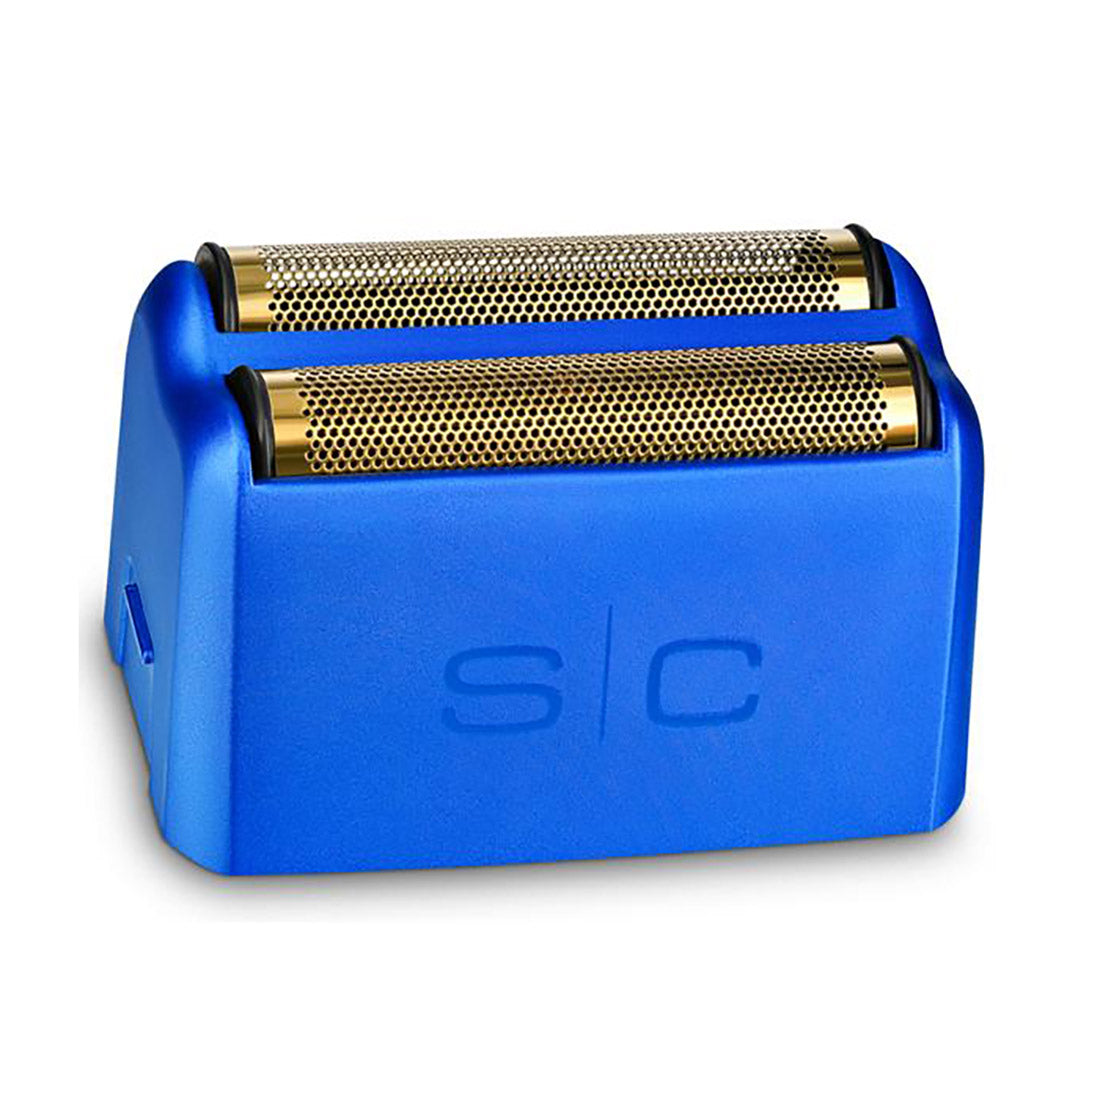 StyleCraft Gold Replacement Foil Head for Prodigy Shaver Metallic Blue